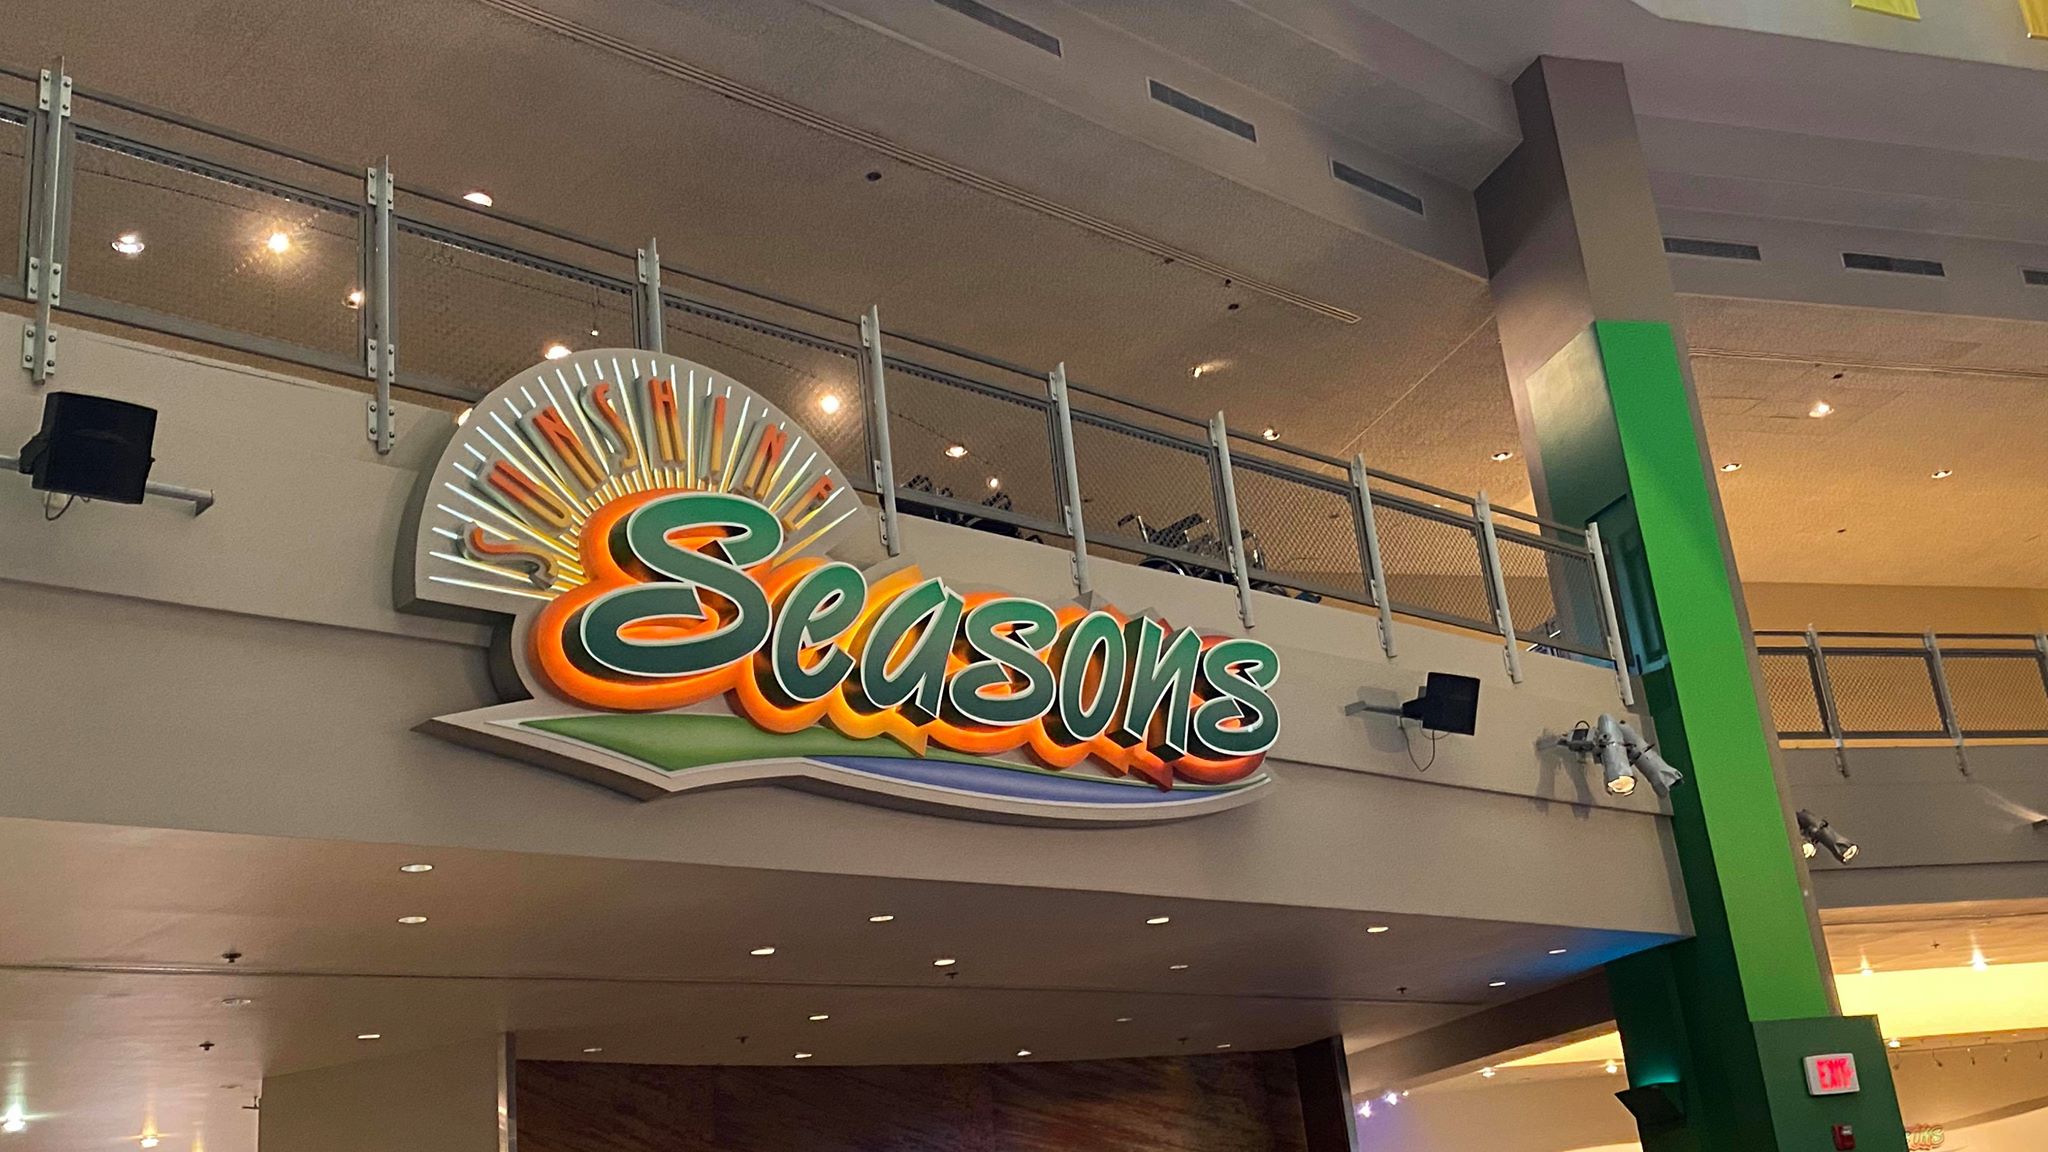 Sunshine Seasons in Epcot Offering a very Limited Menu